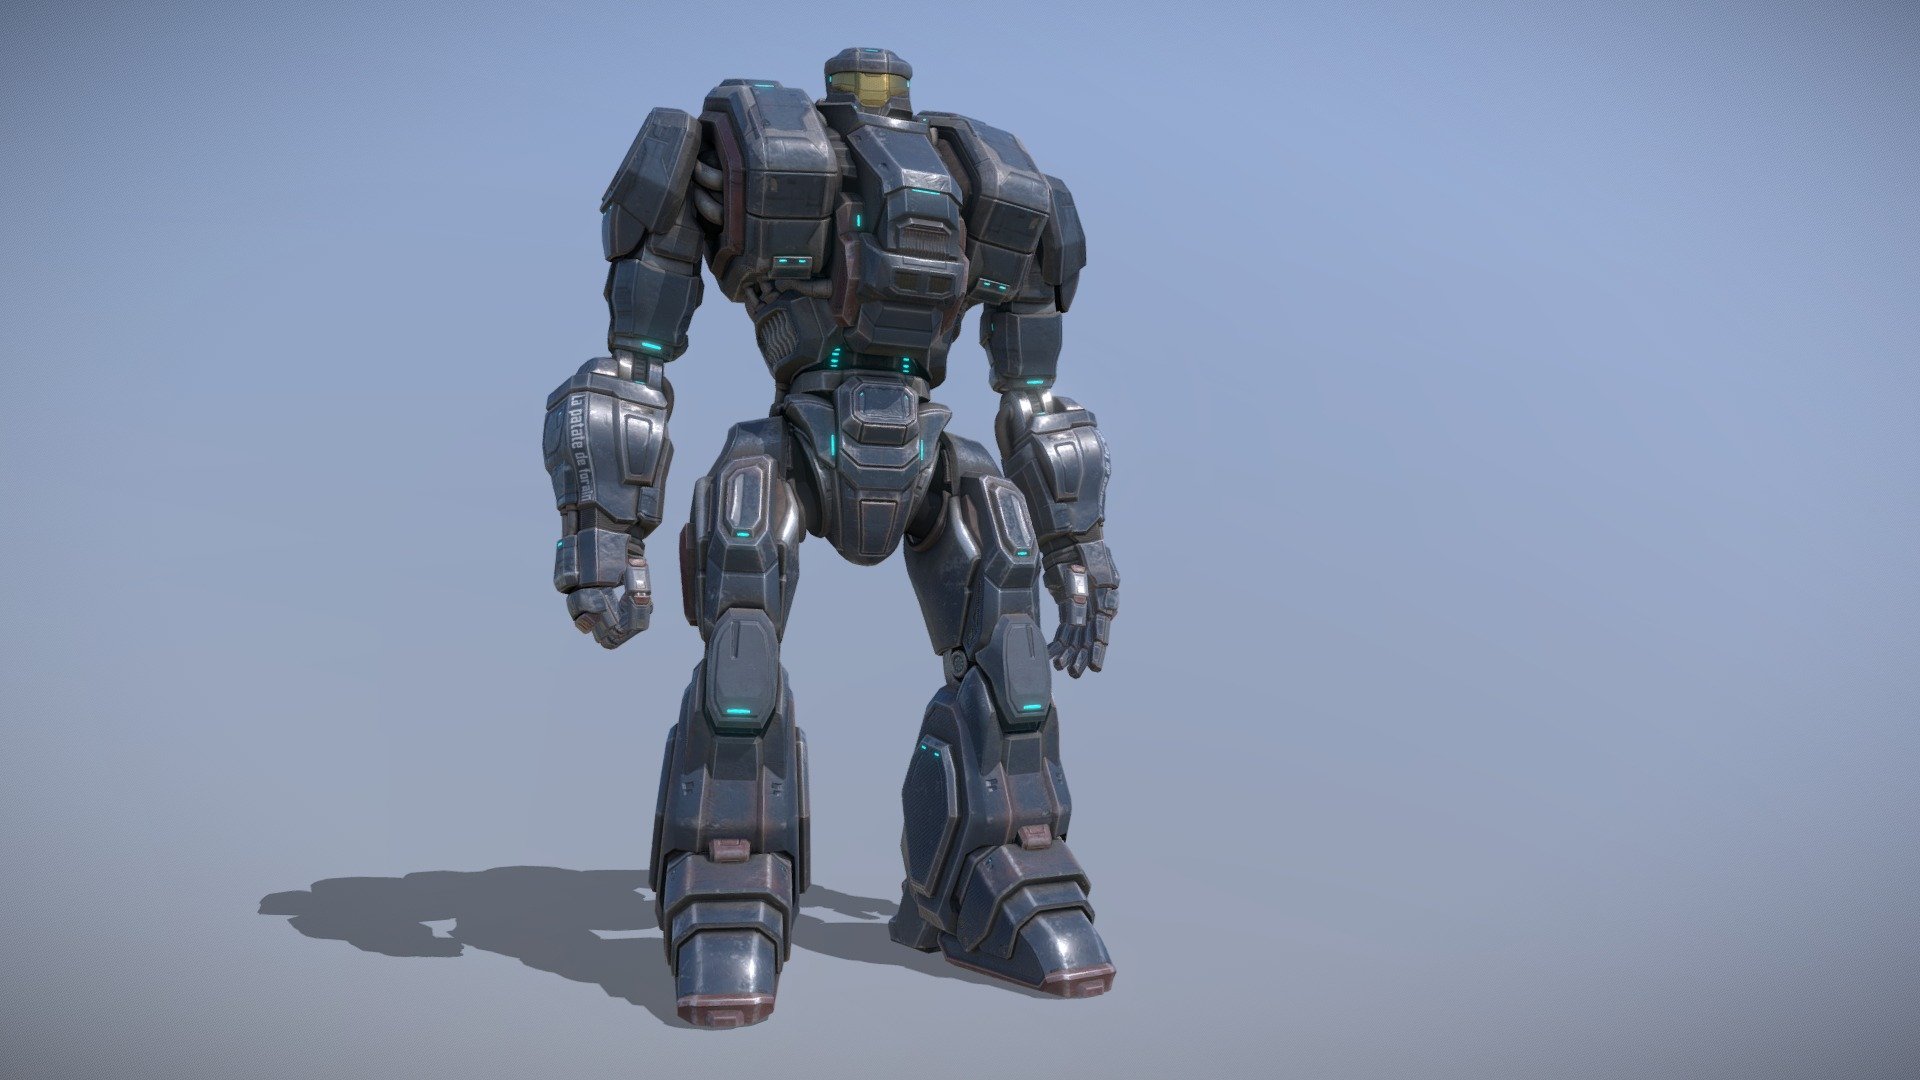 3d model i made over this week, i tried to create a French variant of the Jaegers from pacific rim (in a universe where the monsters attacked europe and other nations) it's name is a reference to the &ldquo;maquis